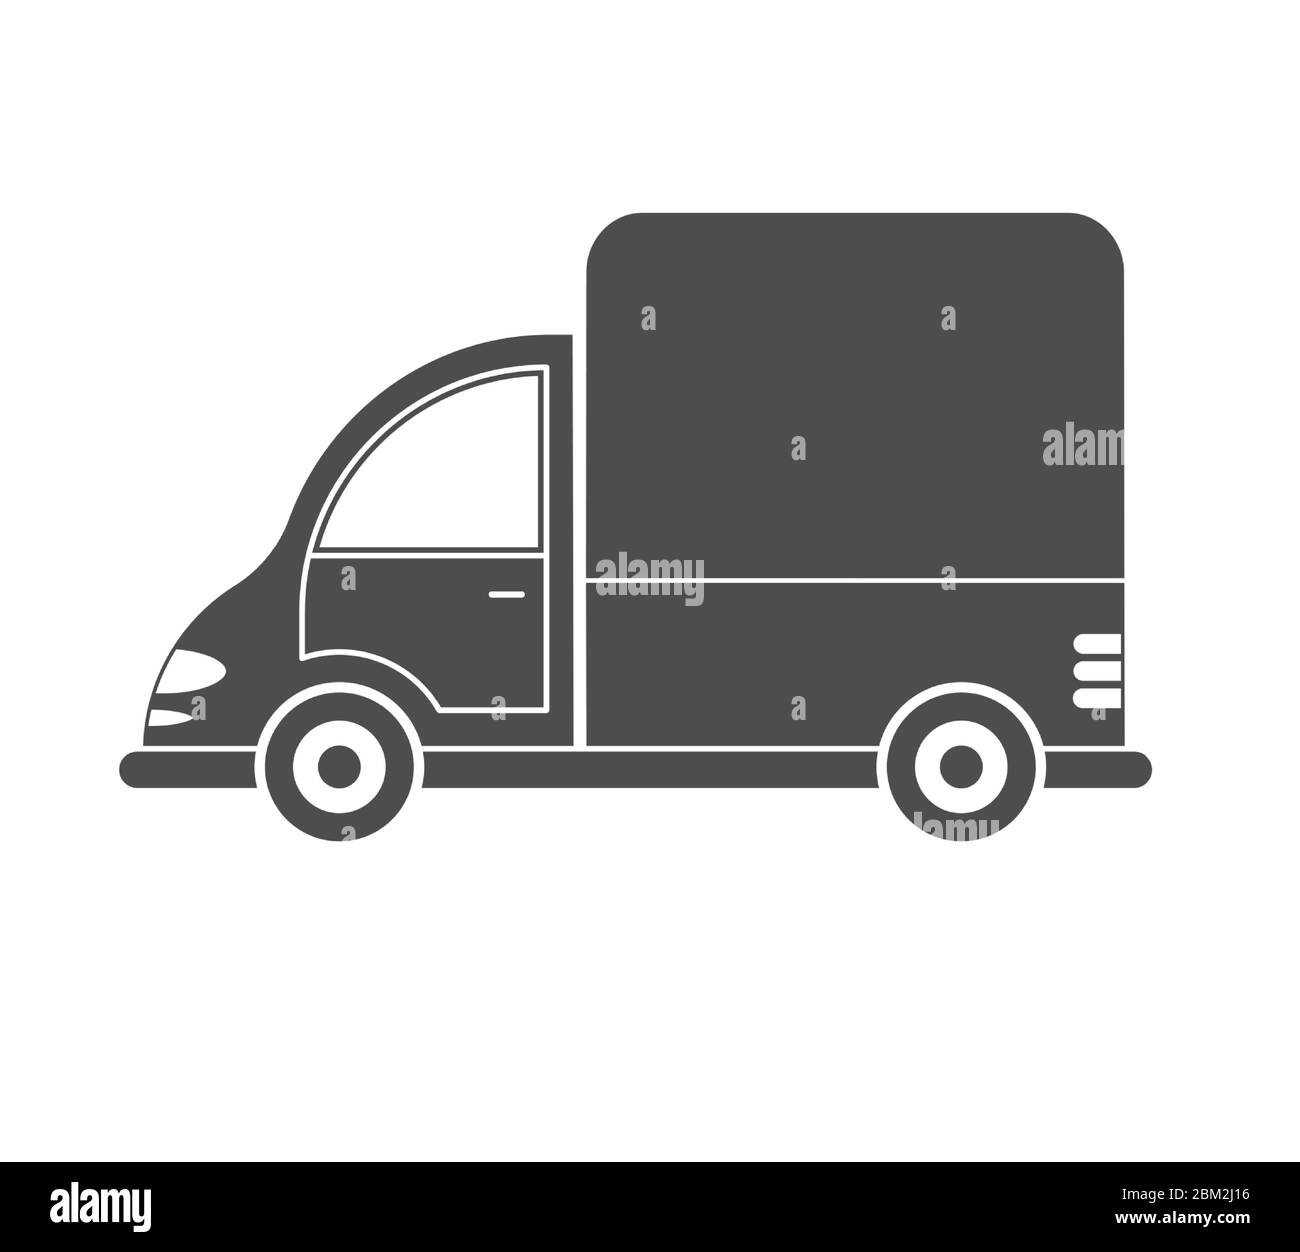 vector icon of a car or commercial van. Simple design, filled contour isolated on a white background. Design for coloring books, websites, and apps Stock Vector